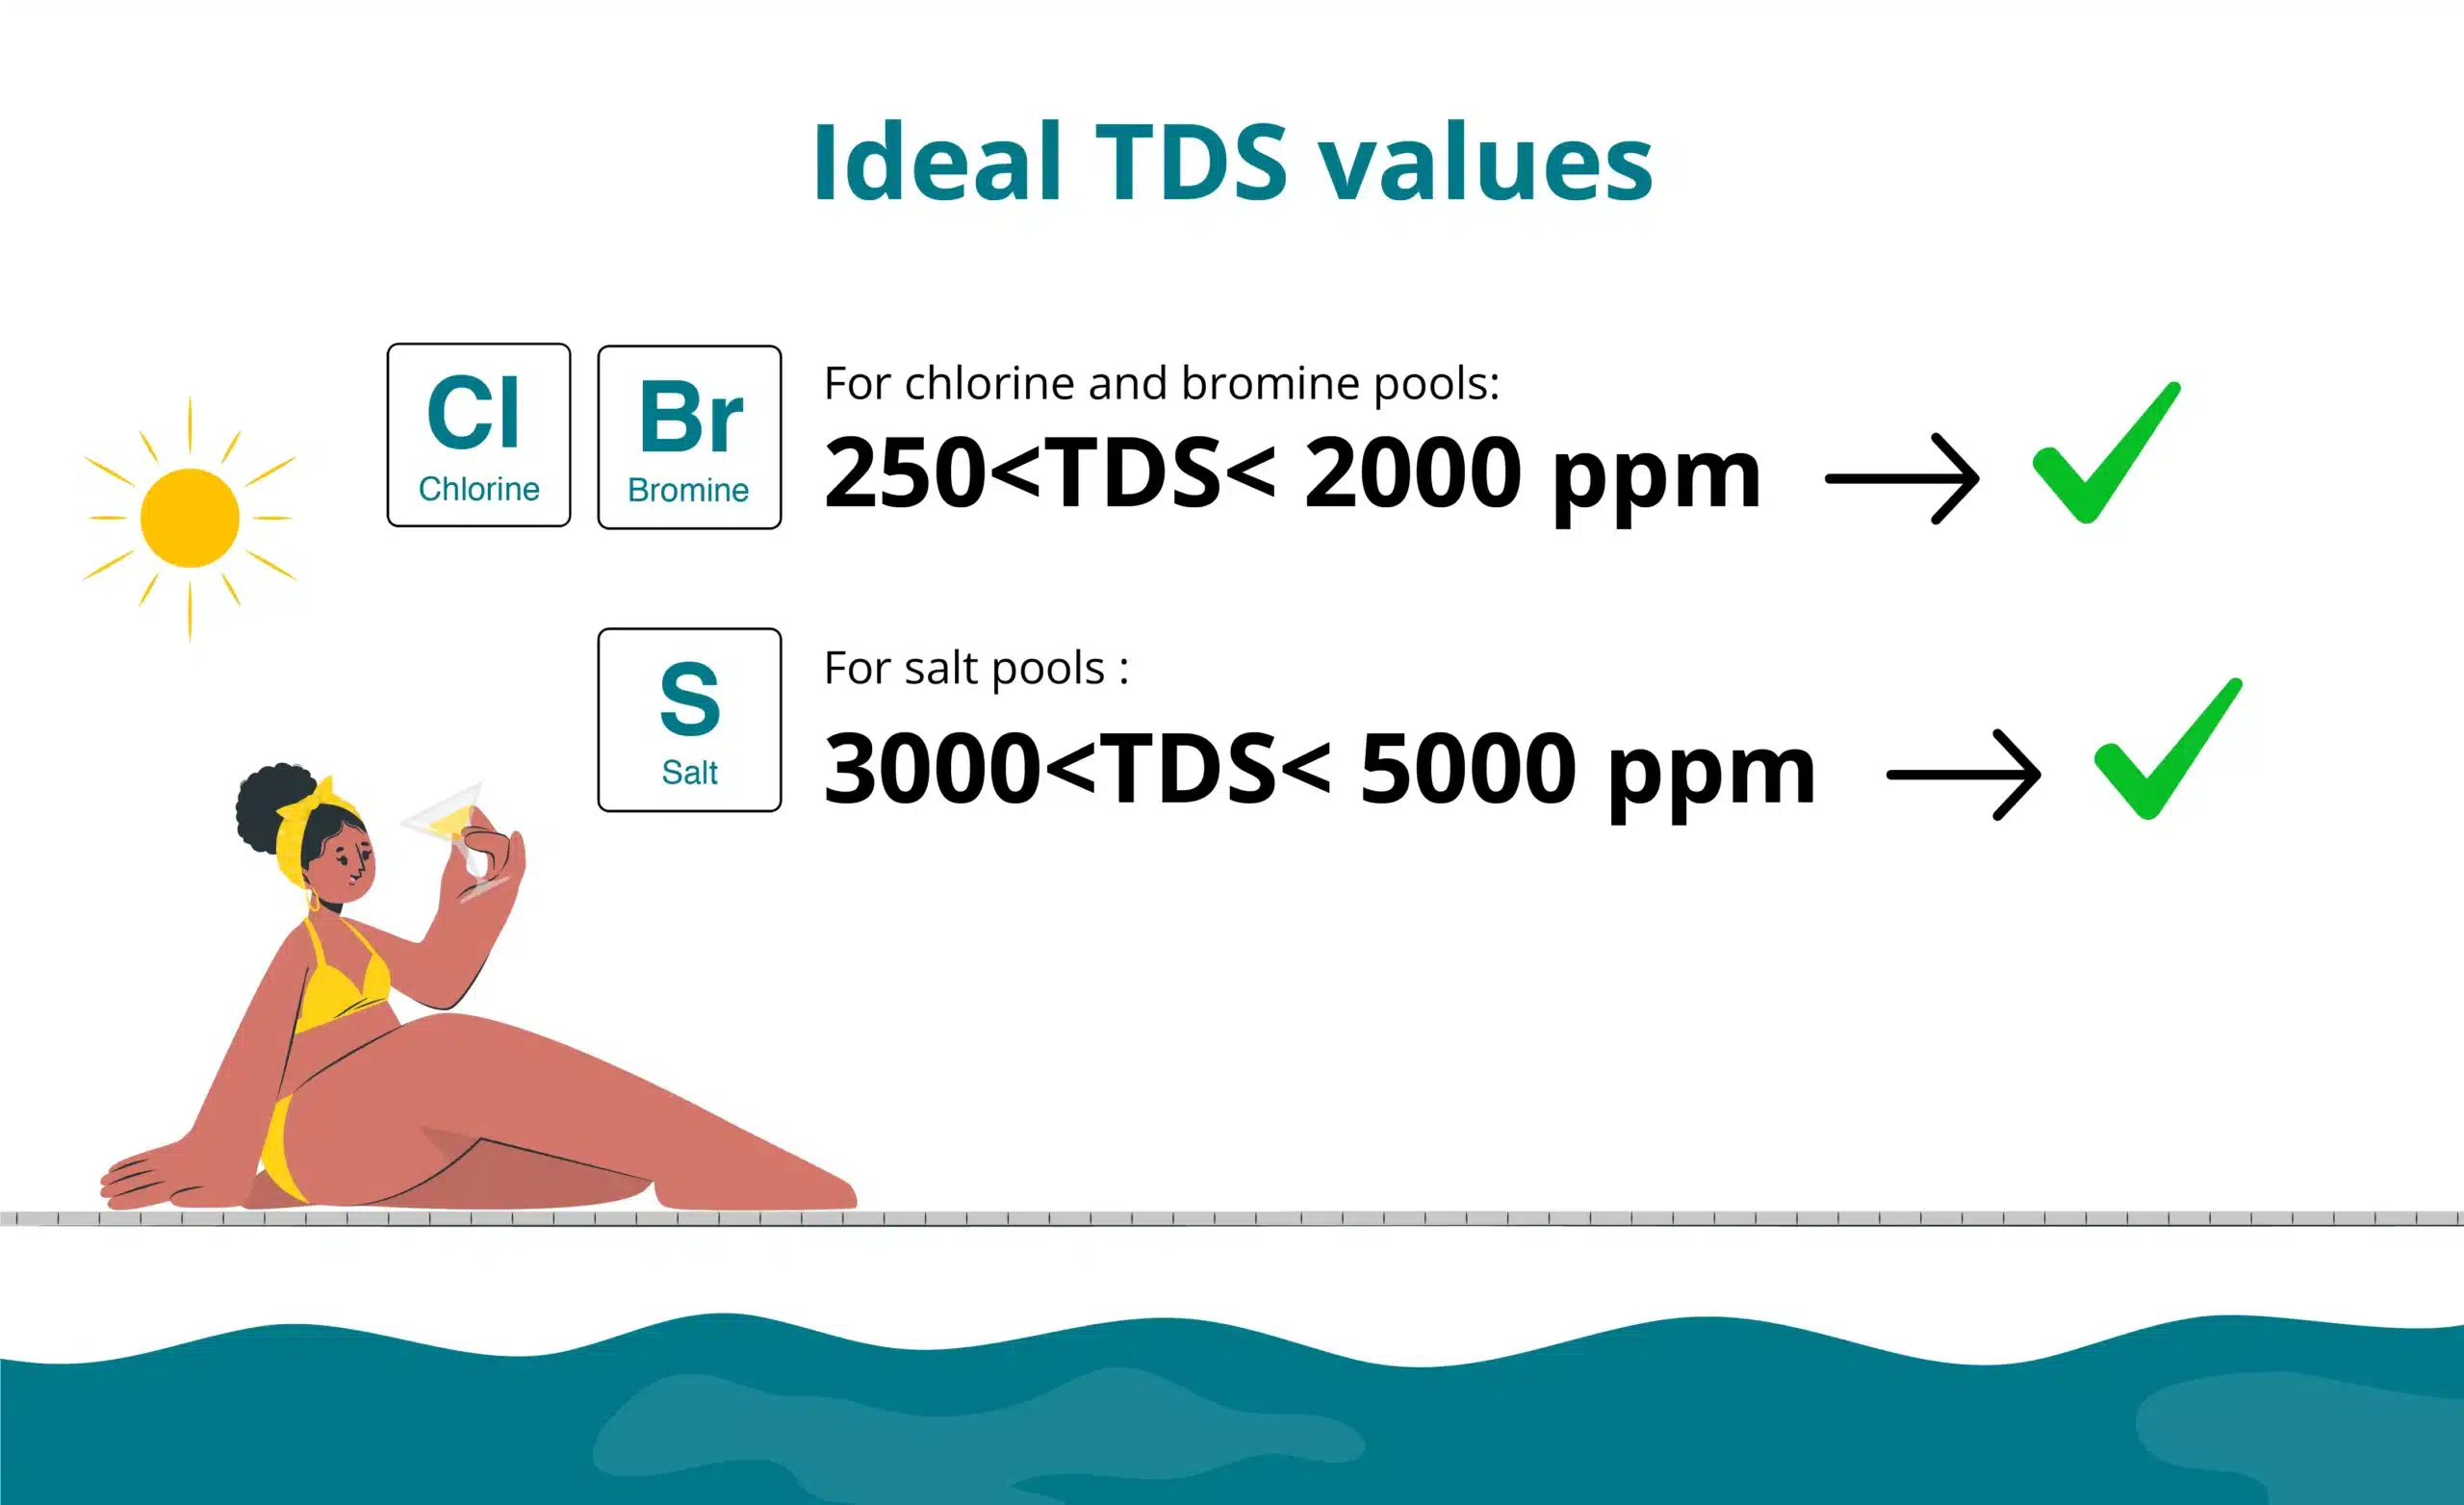 illustration showing ideal TDS values for chlorine/bromine and salt-treated pools and spas 